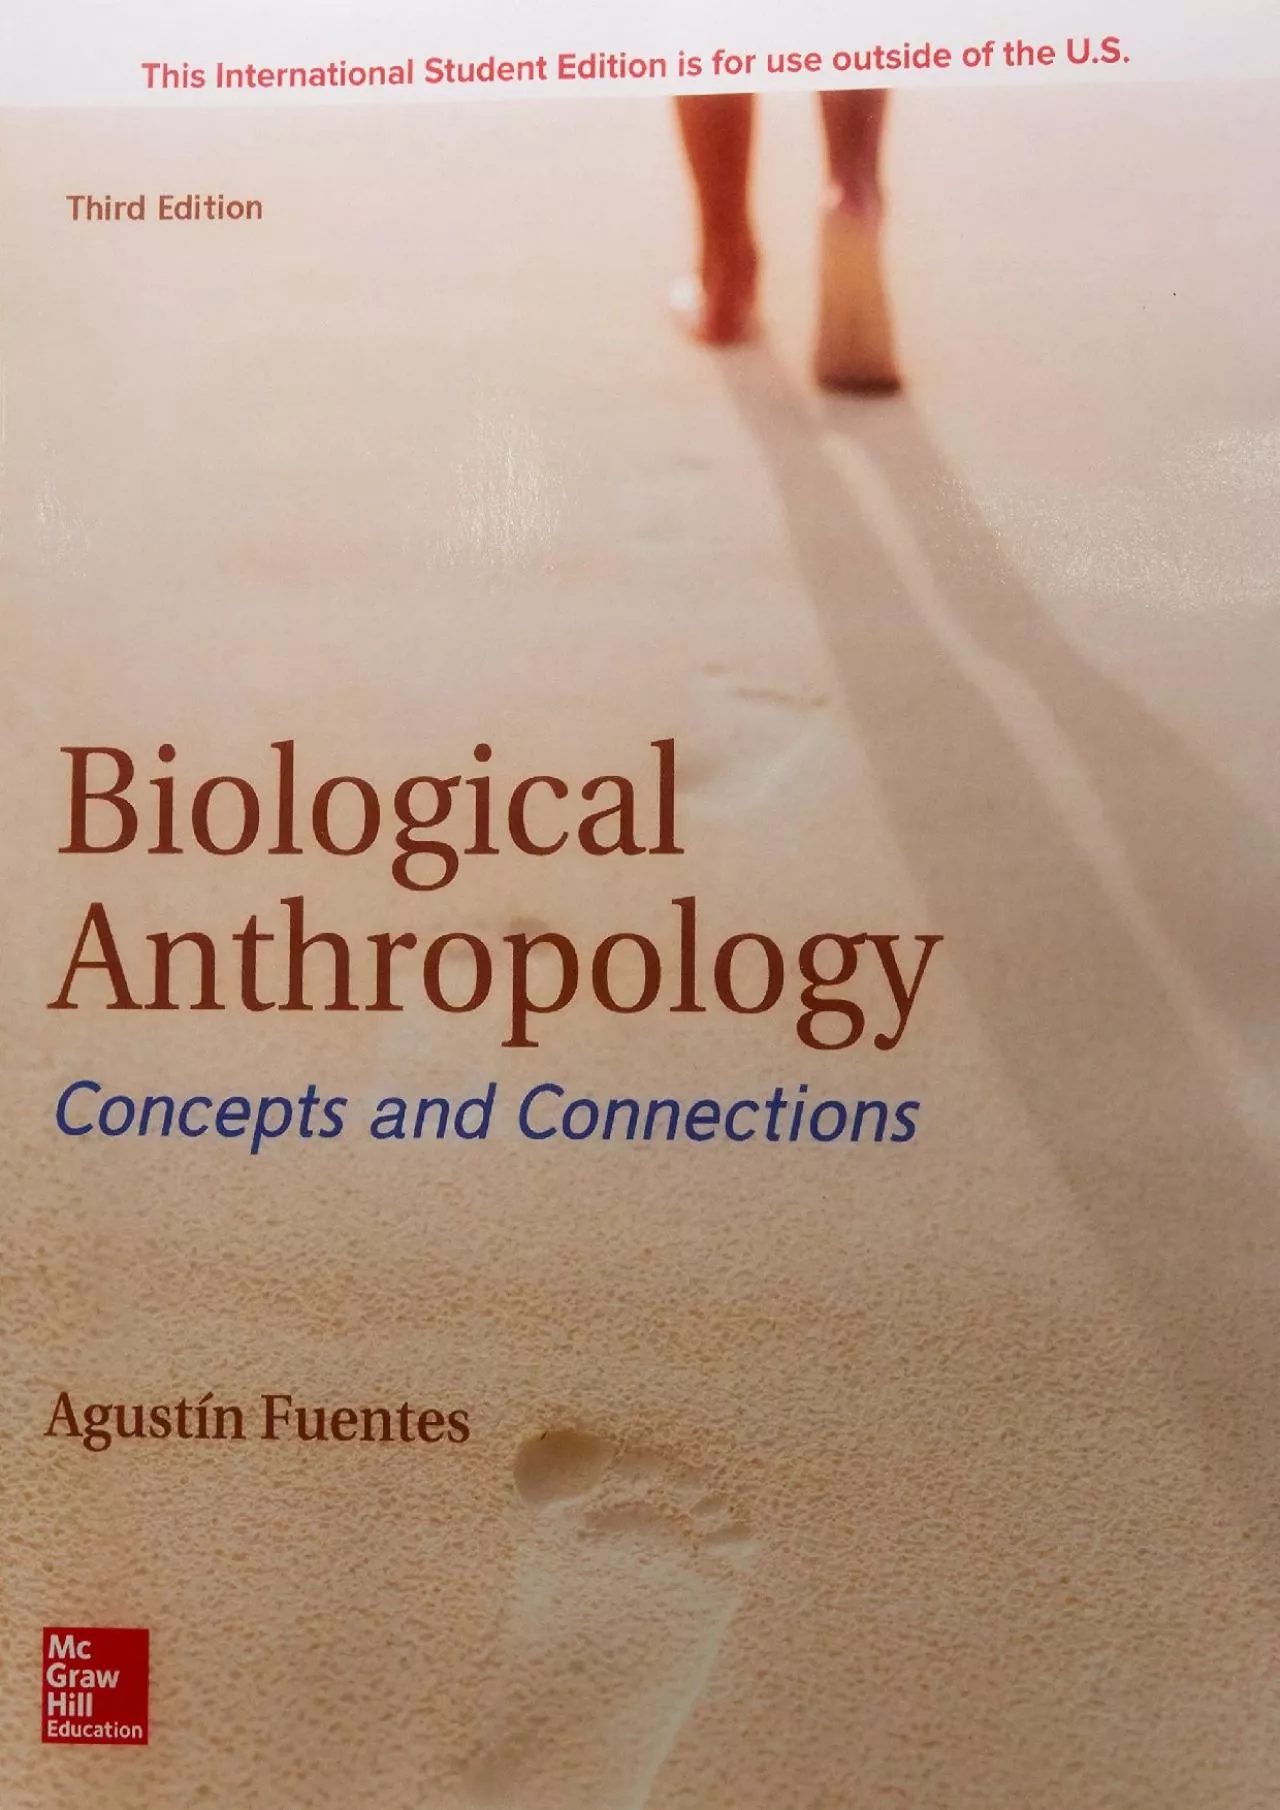 (DOWNLOAD)-Biological Anthropology: Concepts and Connections